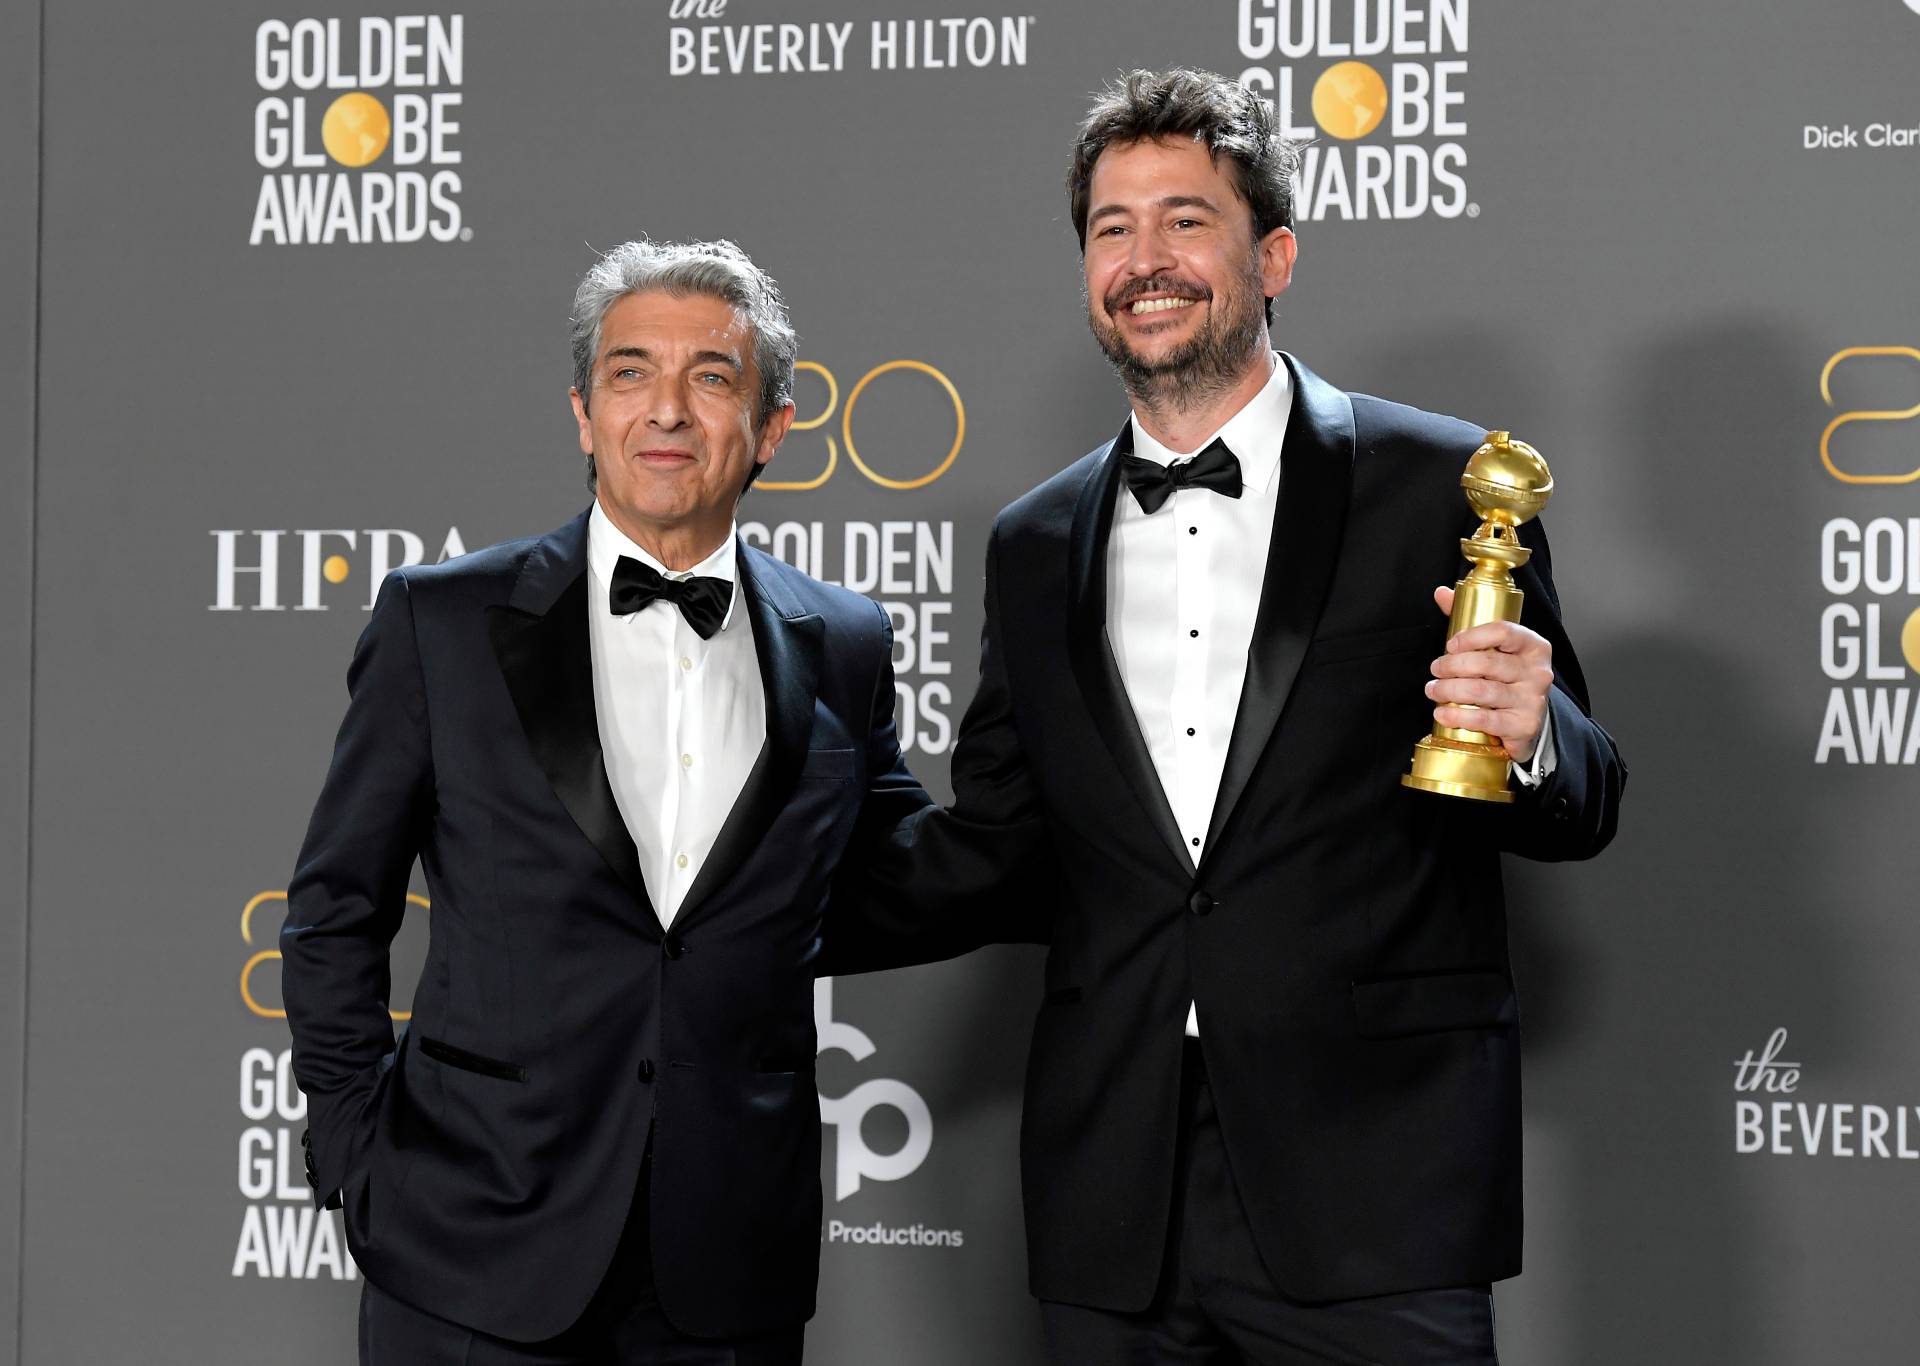 Ricardo Darín and Santiago Miter pose with the award for Best Non-English Language Film for "Argentina, 1985" in the press room at the 80th Annual Golden Globe Awards held at the Beverly Hilton Hotel on January 10, 2023 in Beverly Hills, California